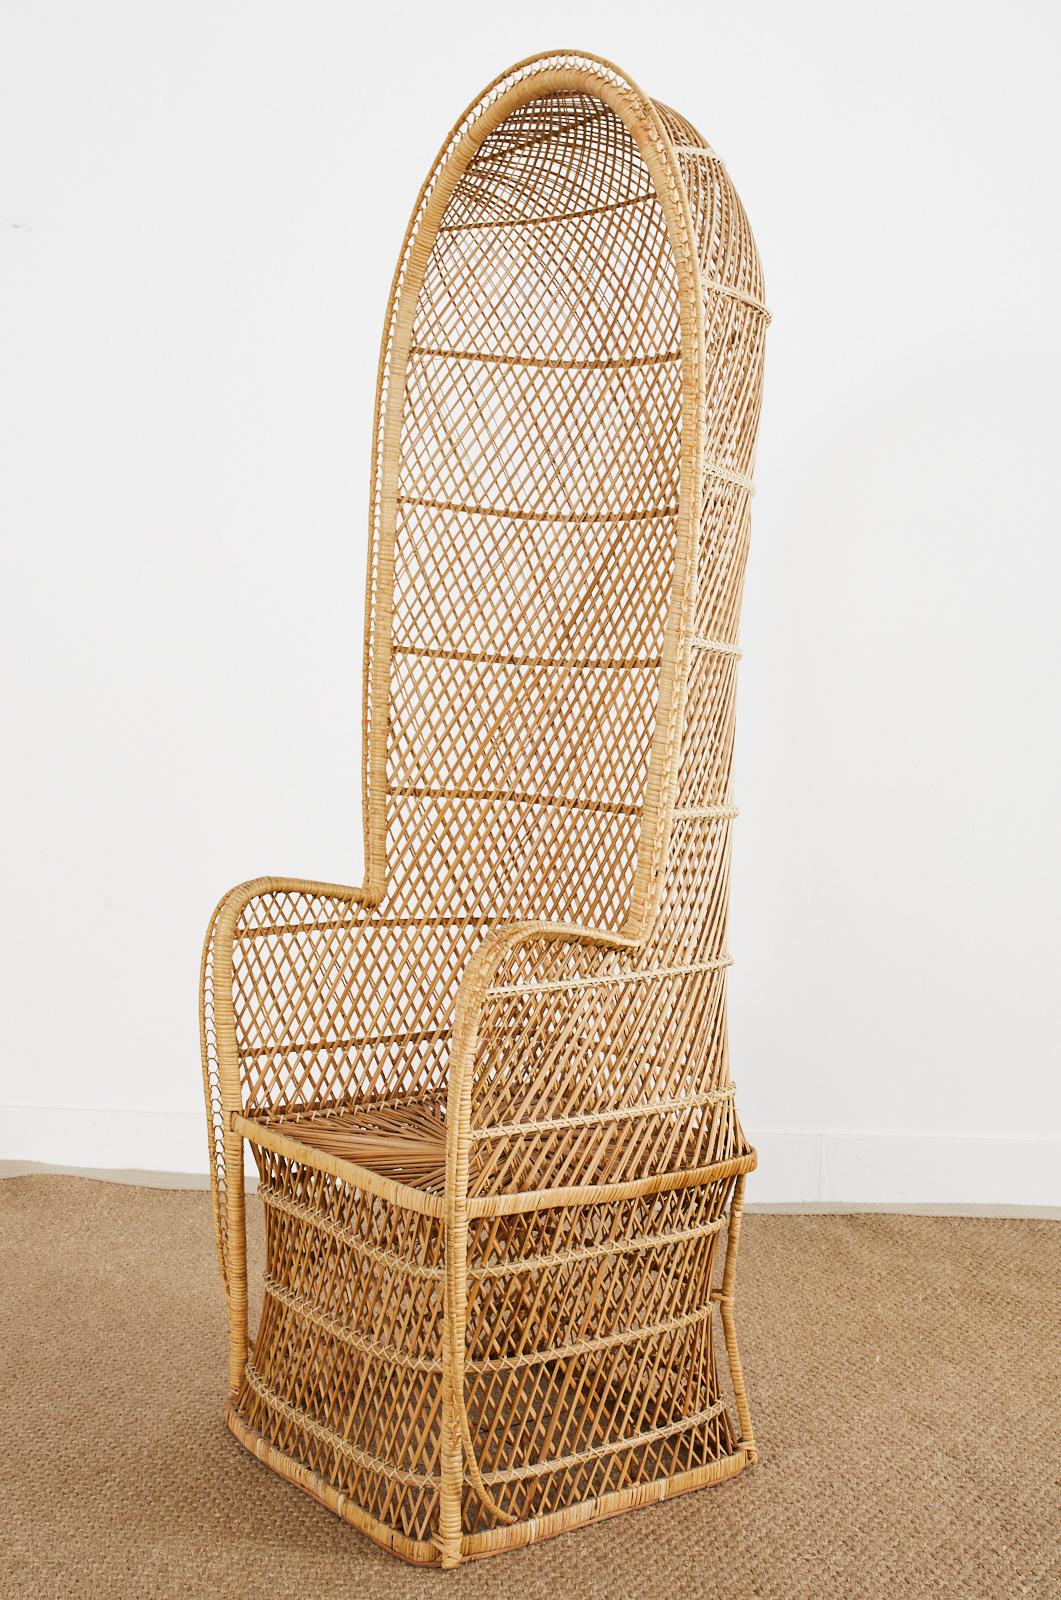 tall wicker chairs